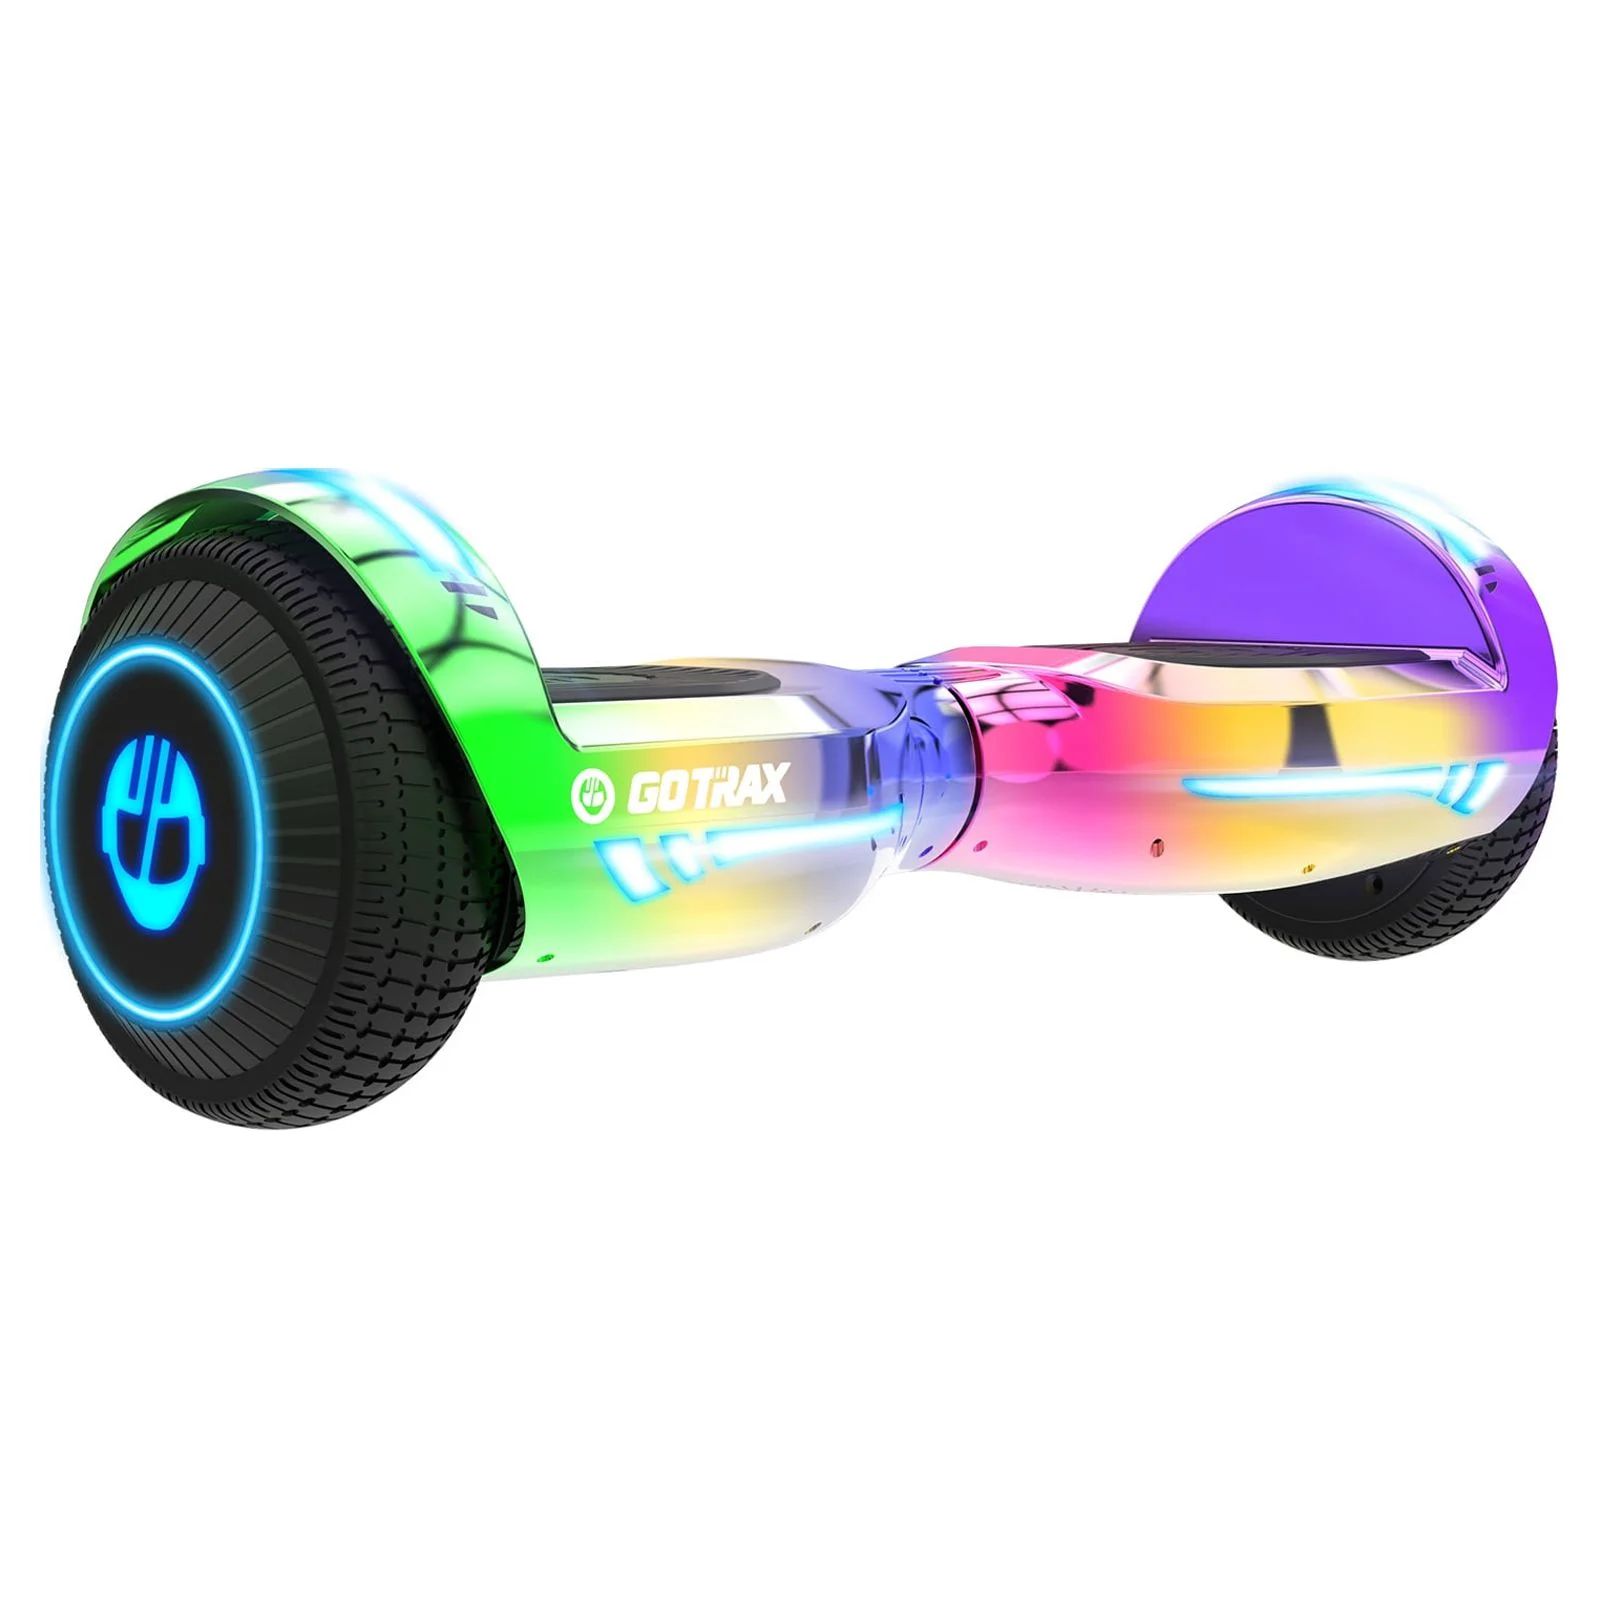 Gotrax Glide 6.5" Hoverboard for Kids Ages 6-12 with Bluetooth Speaker and Led Lights, Multicolor | Walmart (US)